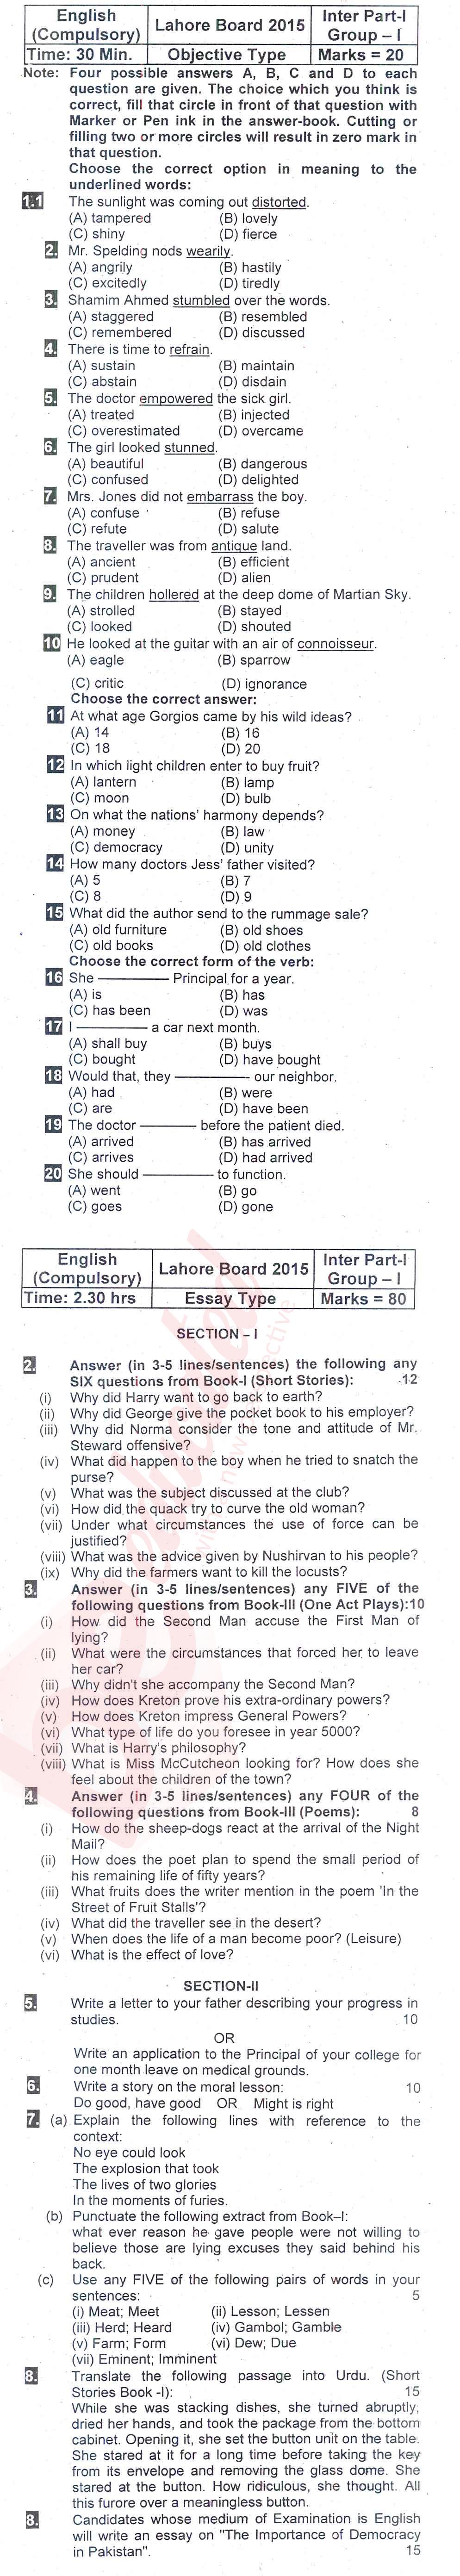 English 11th class Past Paper Group 1 BISE Lahore 2015